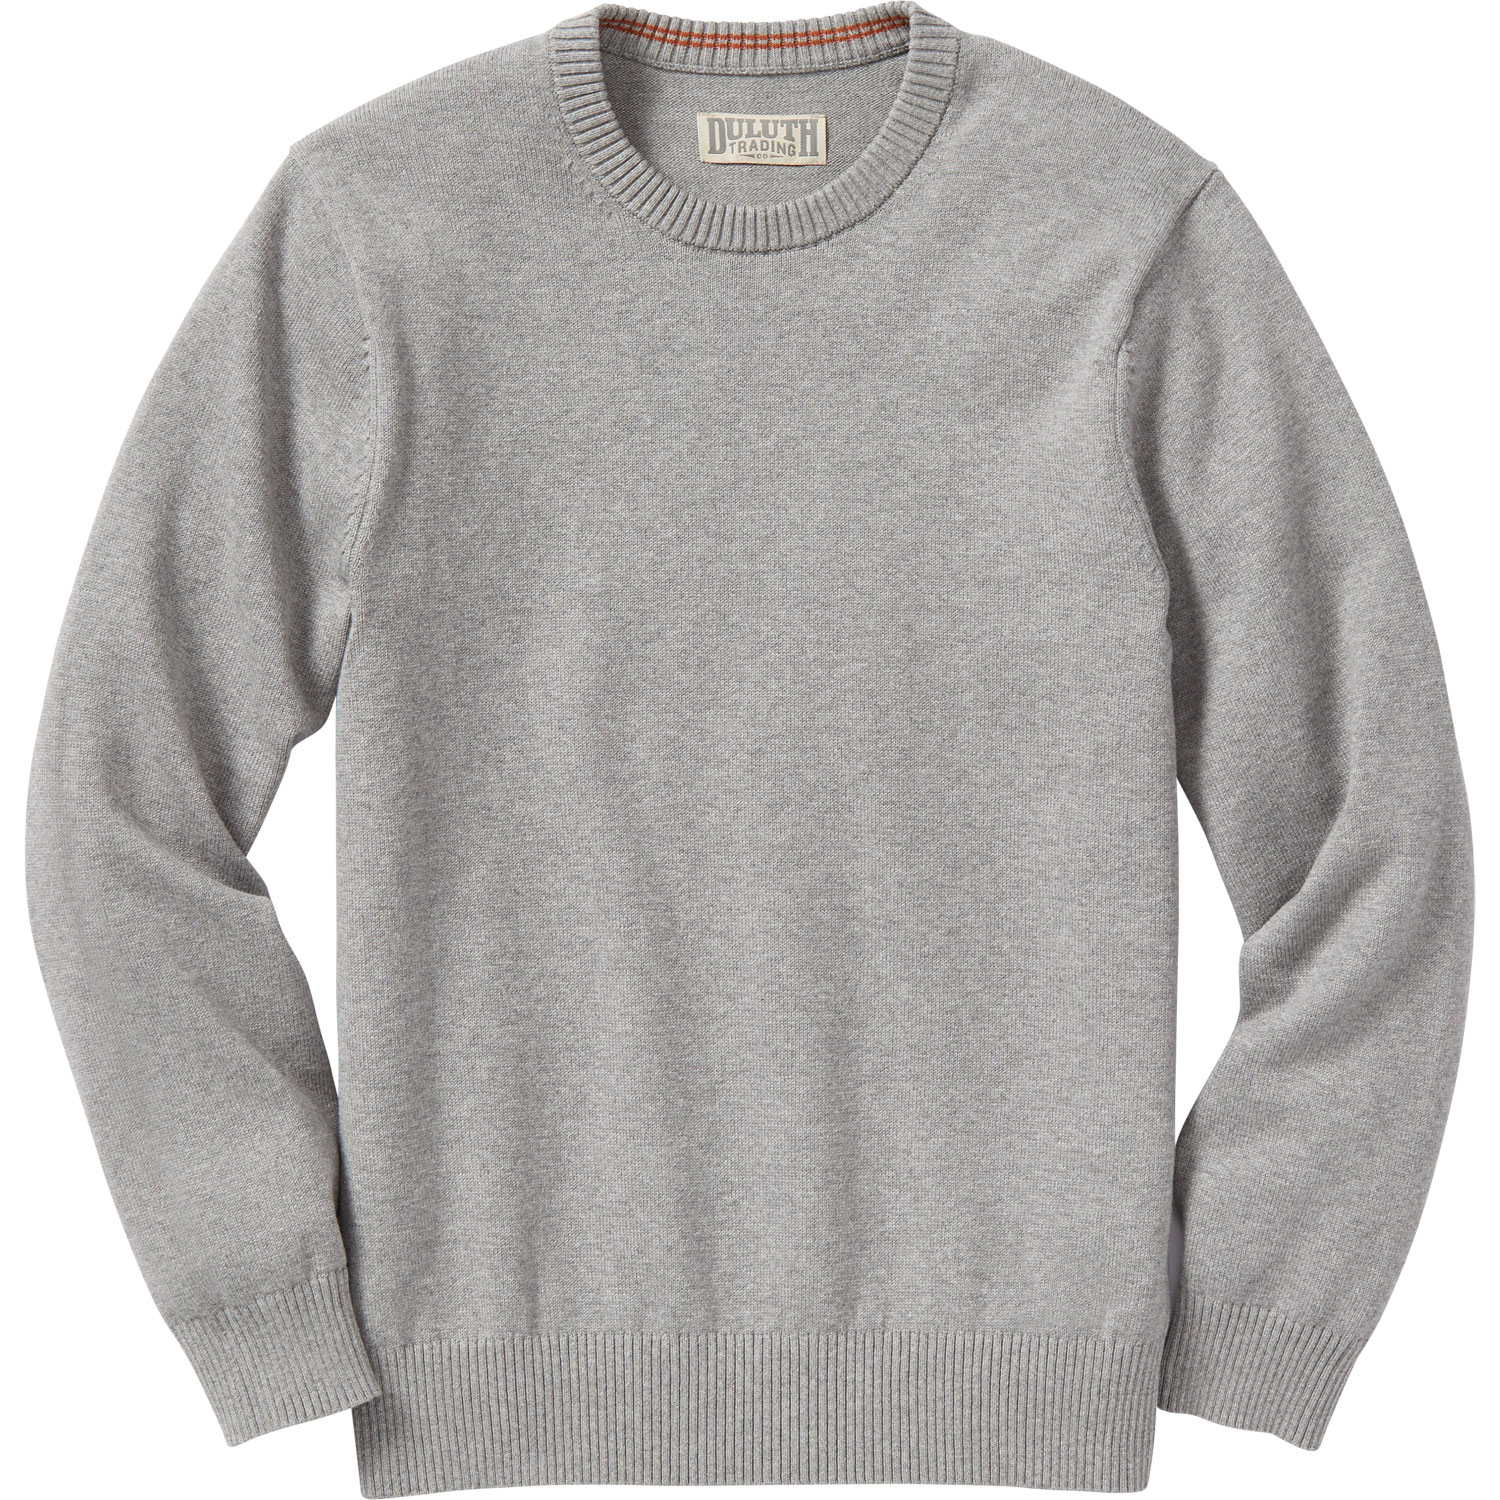 Men's Strongarm Crew Sweater | Duluth Trading Company